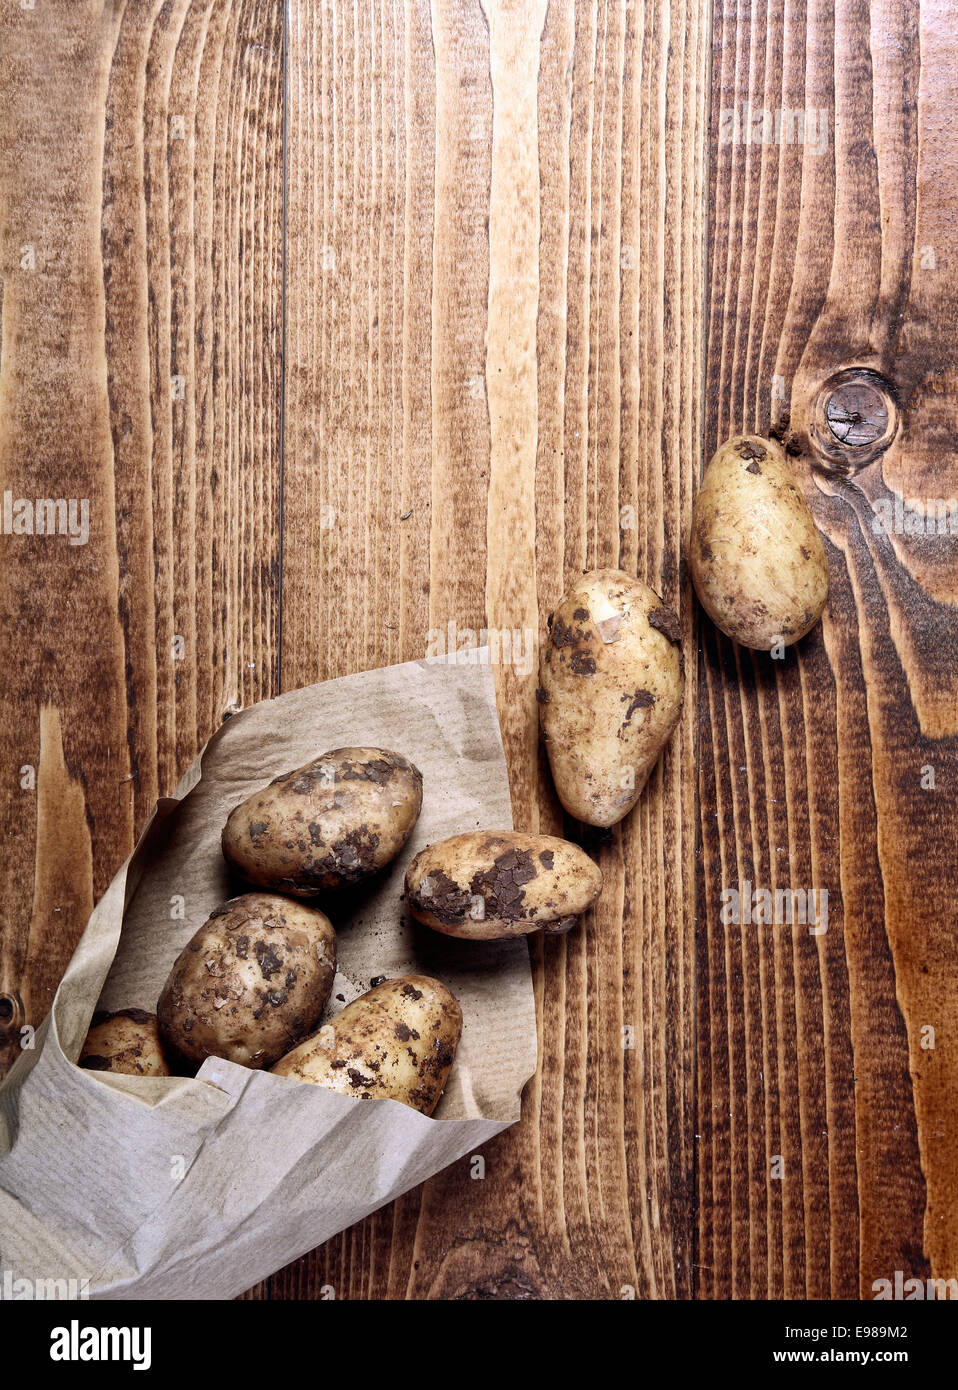 Overhead view of unwashed newly harvested farm fresh potatoes at market spilling out of a paper wrap onto a textured wooden surface Stock Photo